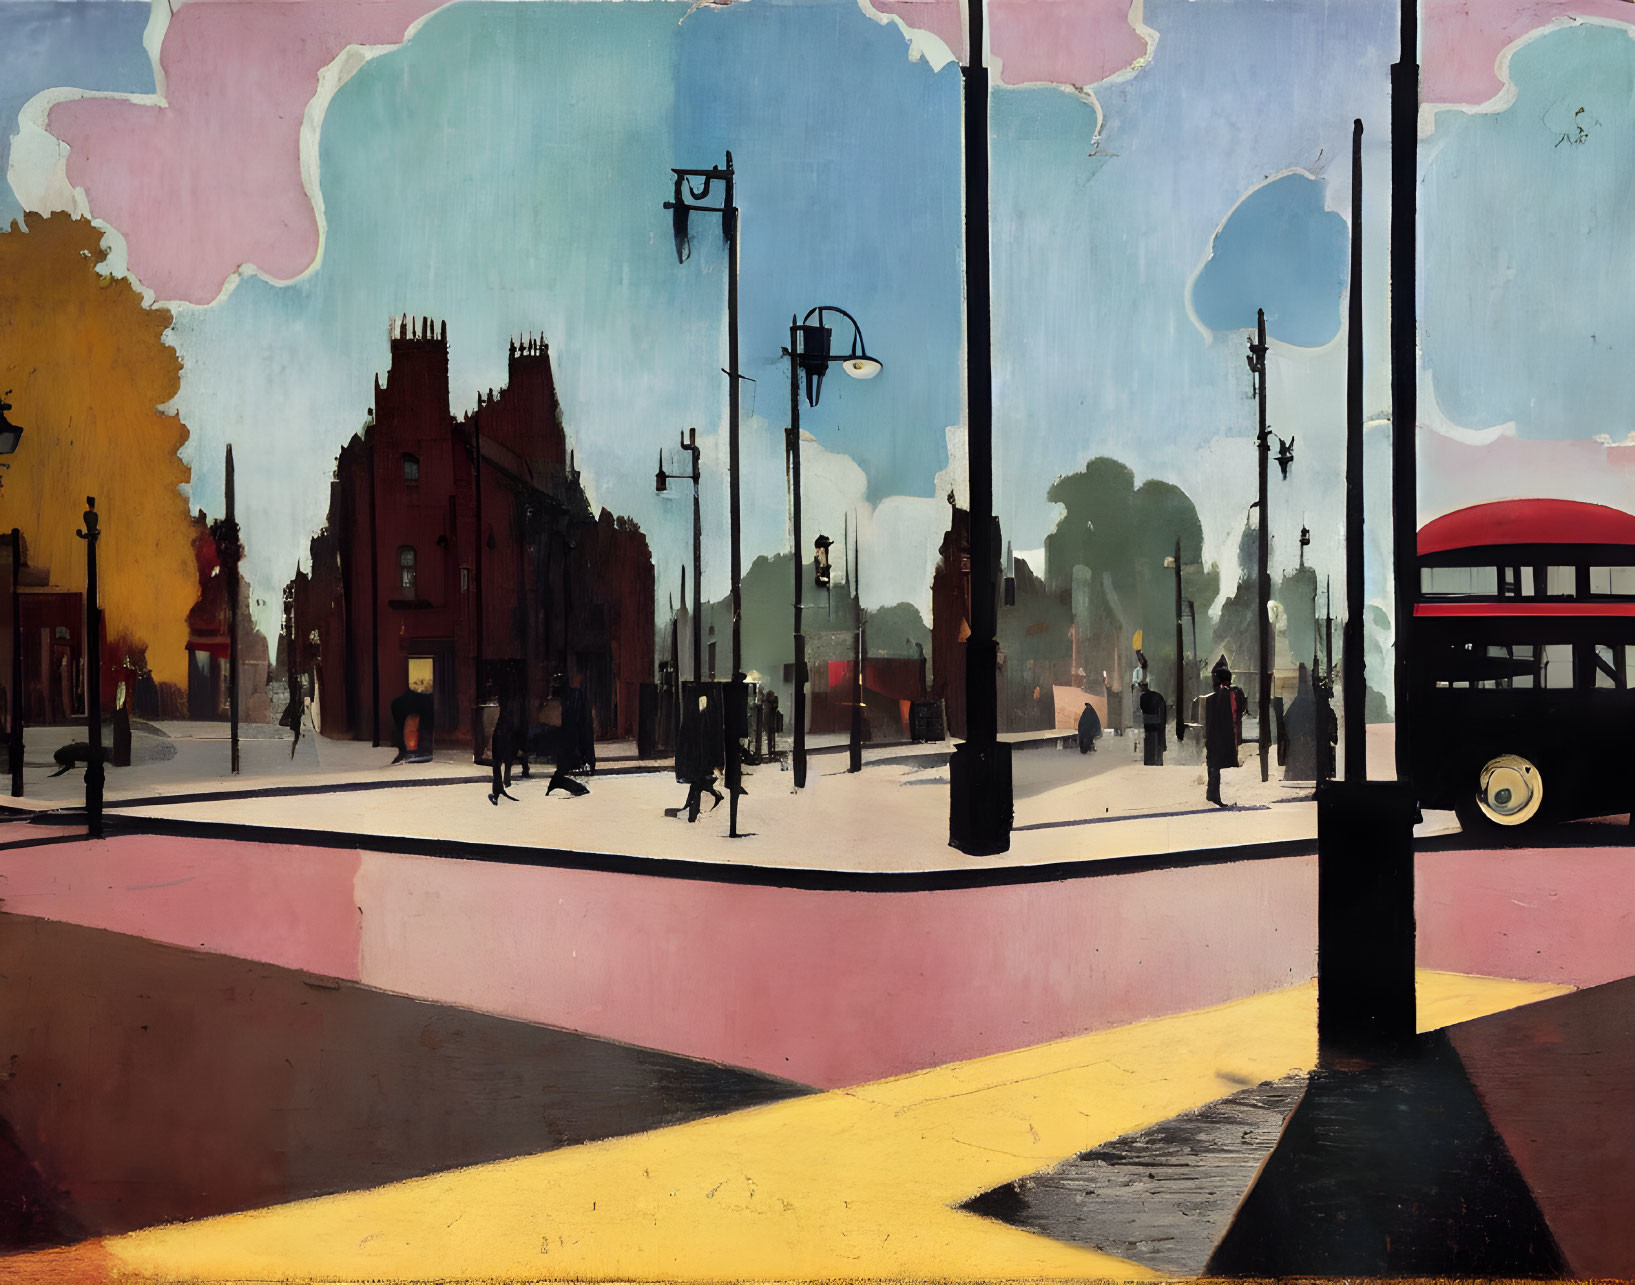 Stylized street scene with pedestrians, bus, and architecture under pastel sky